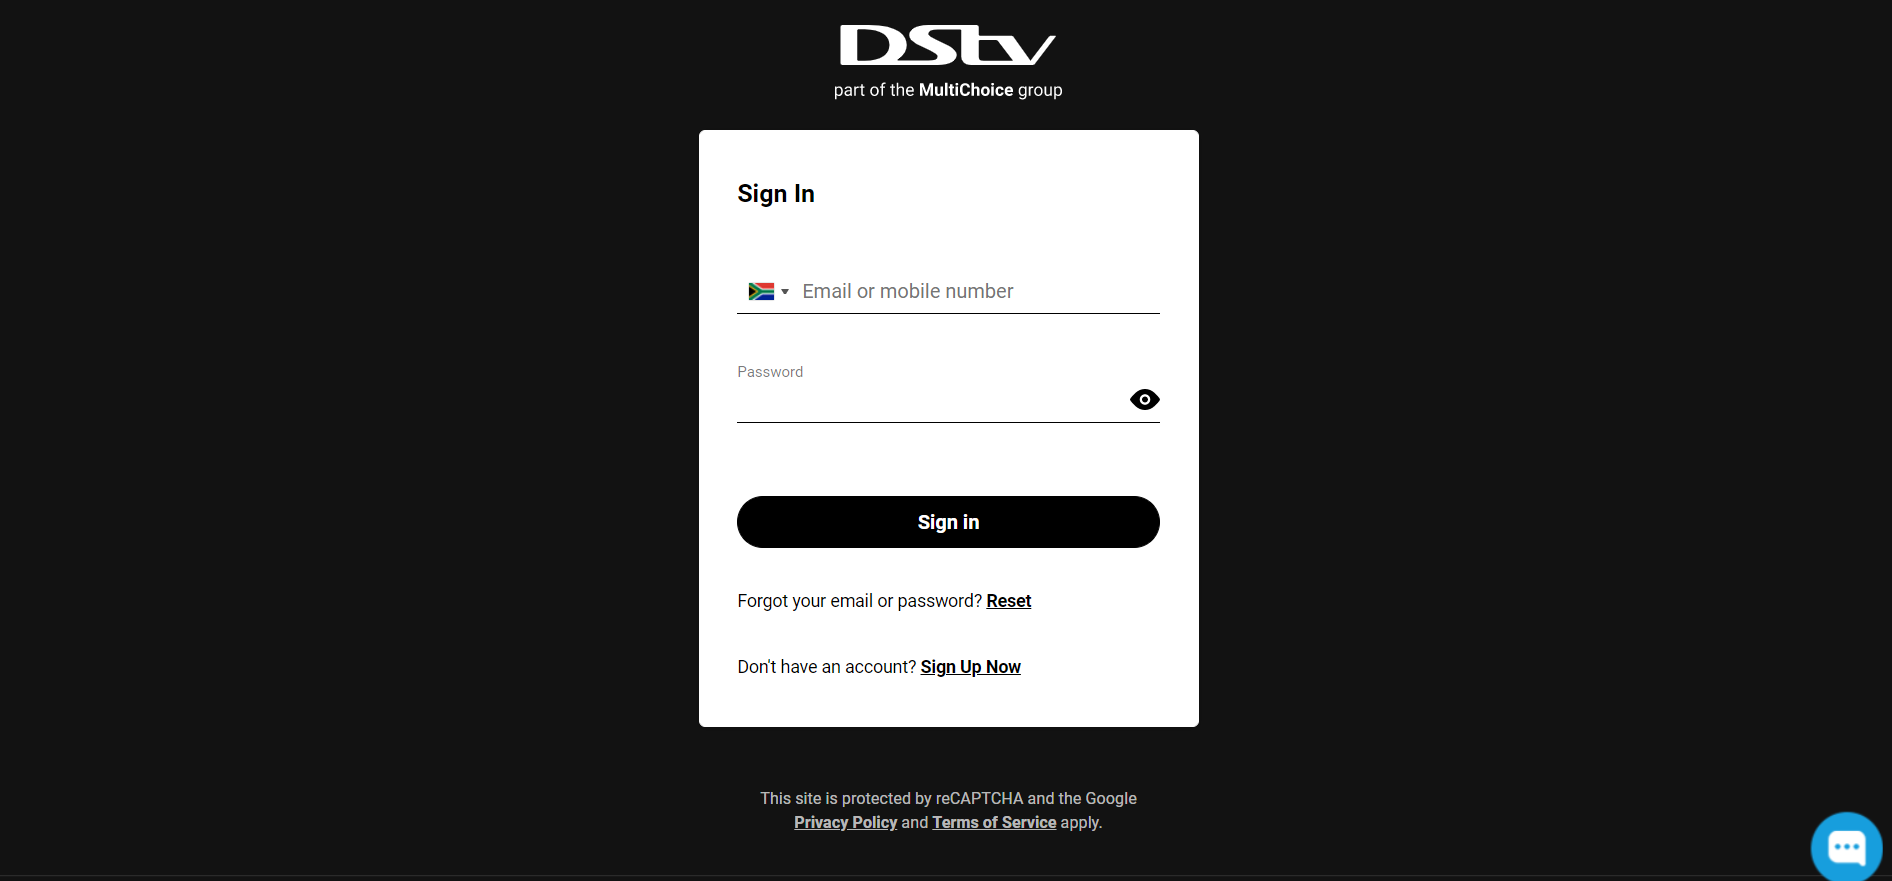 How to connect your DStv with your smartphone